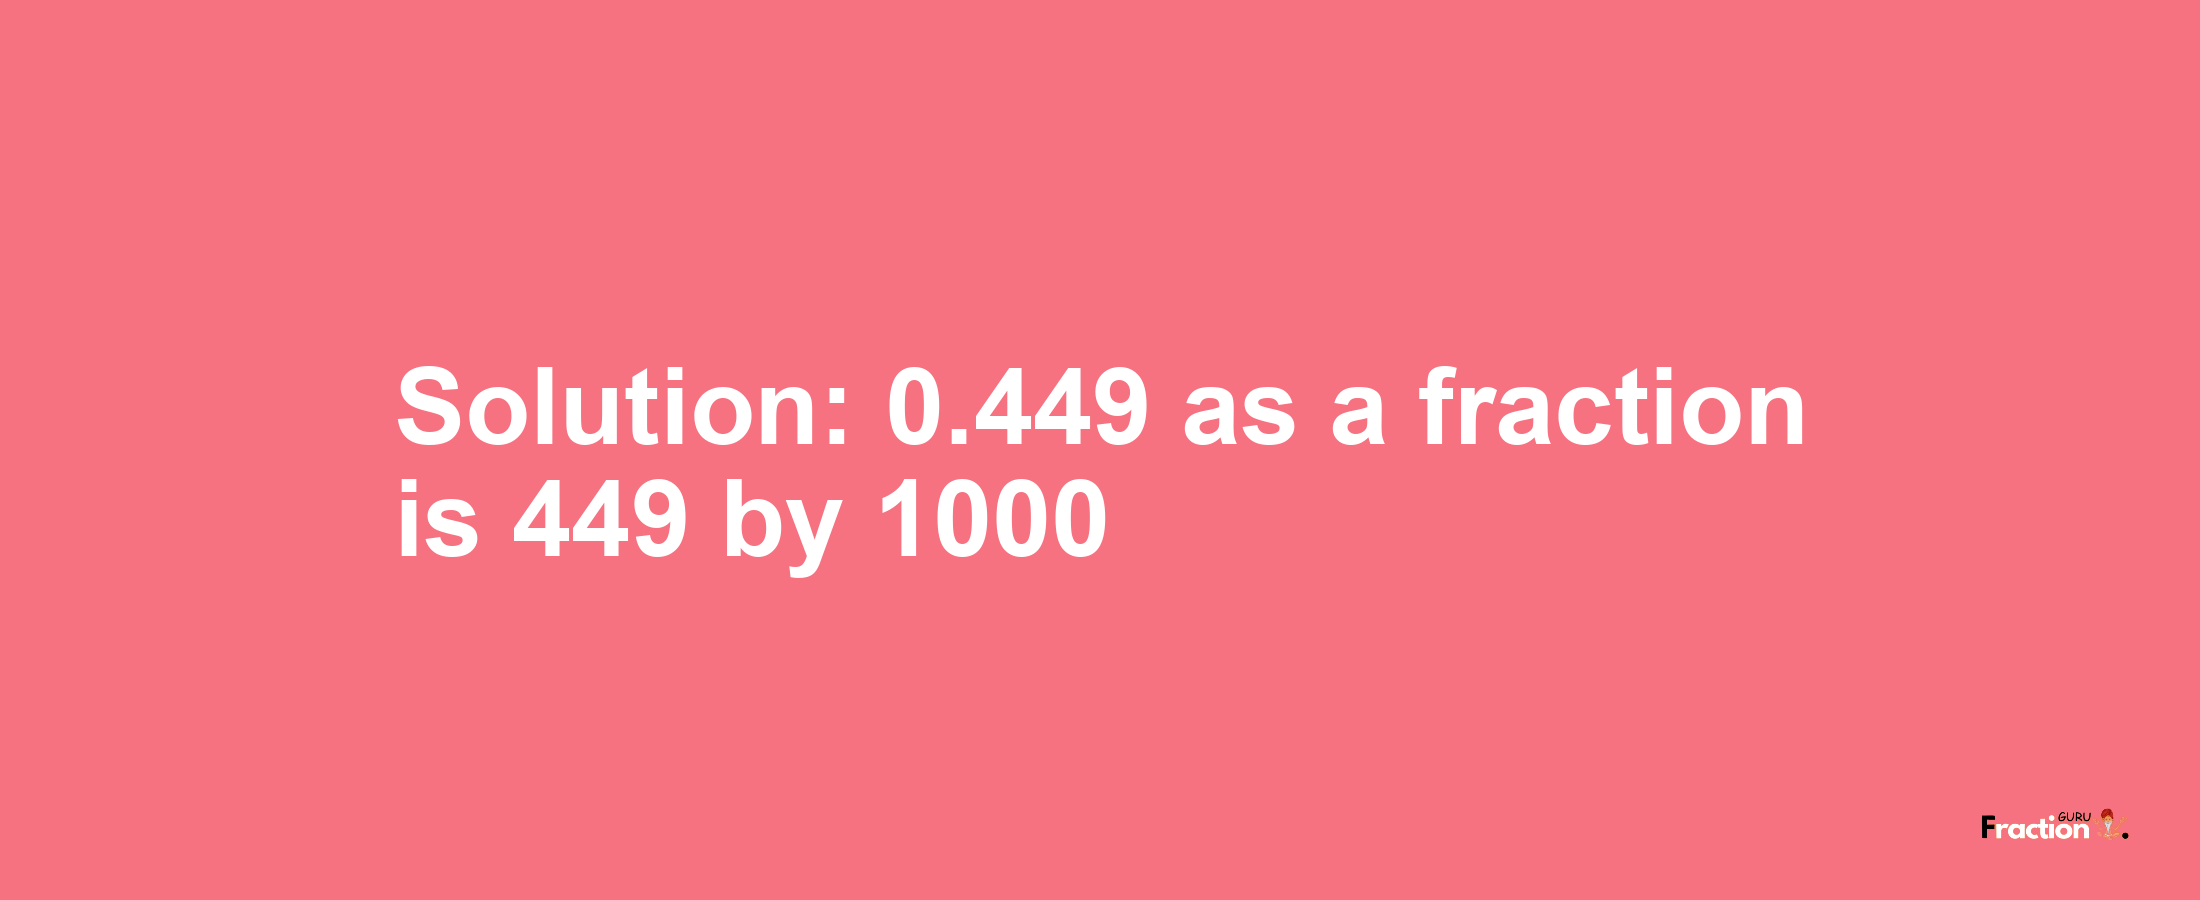 Solution:0.449 as a fraction is 449/1000